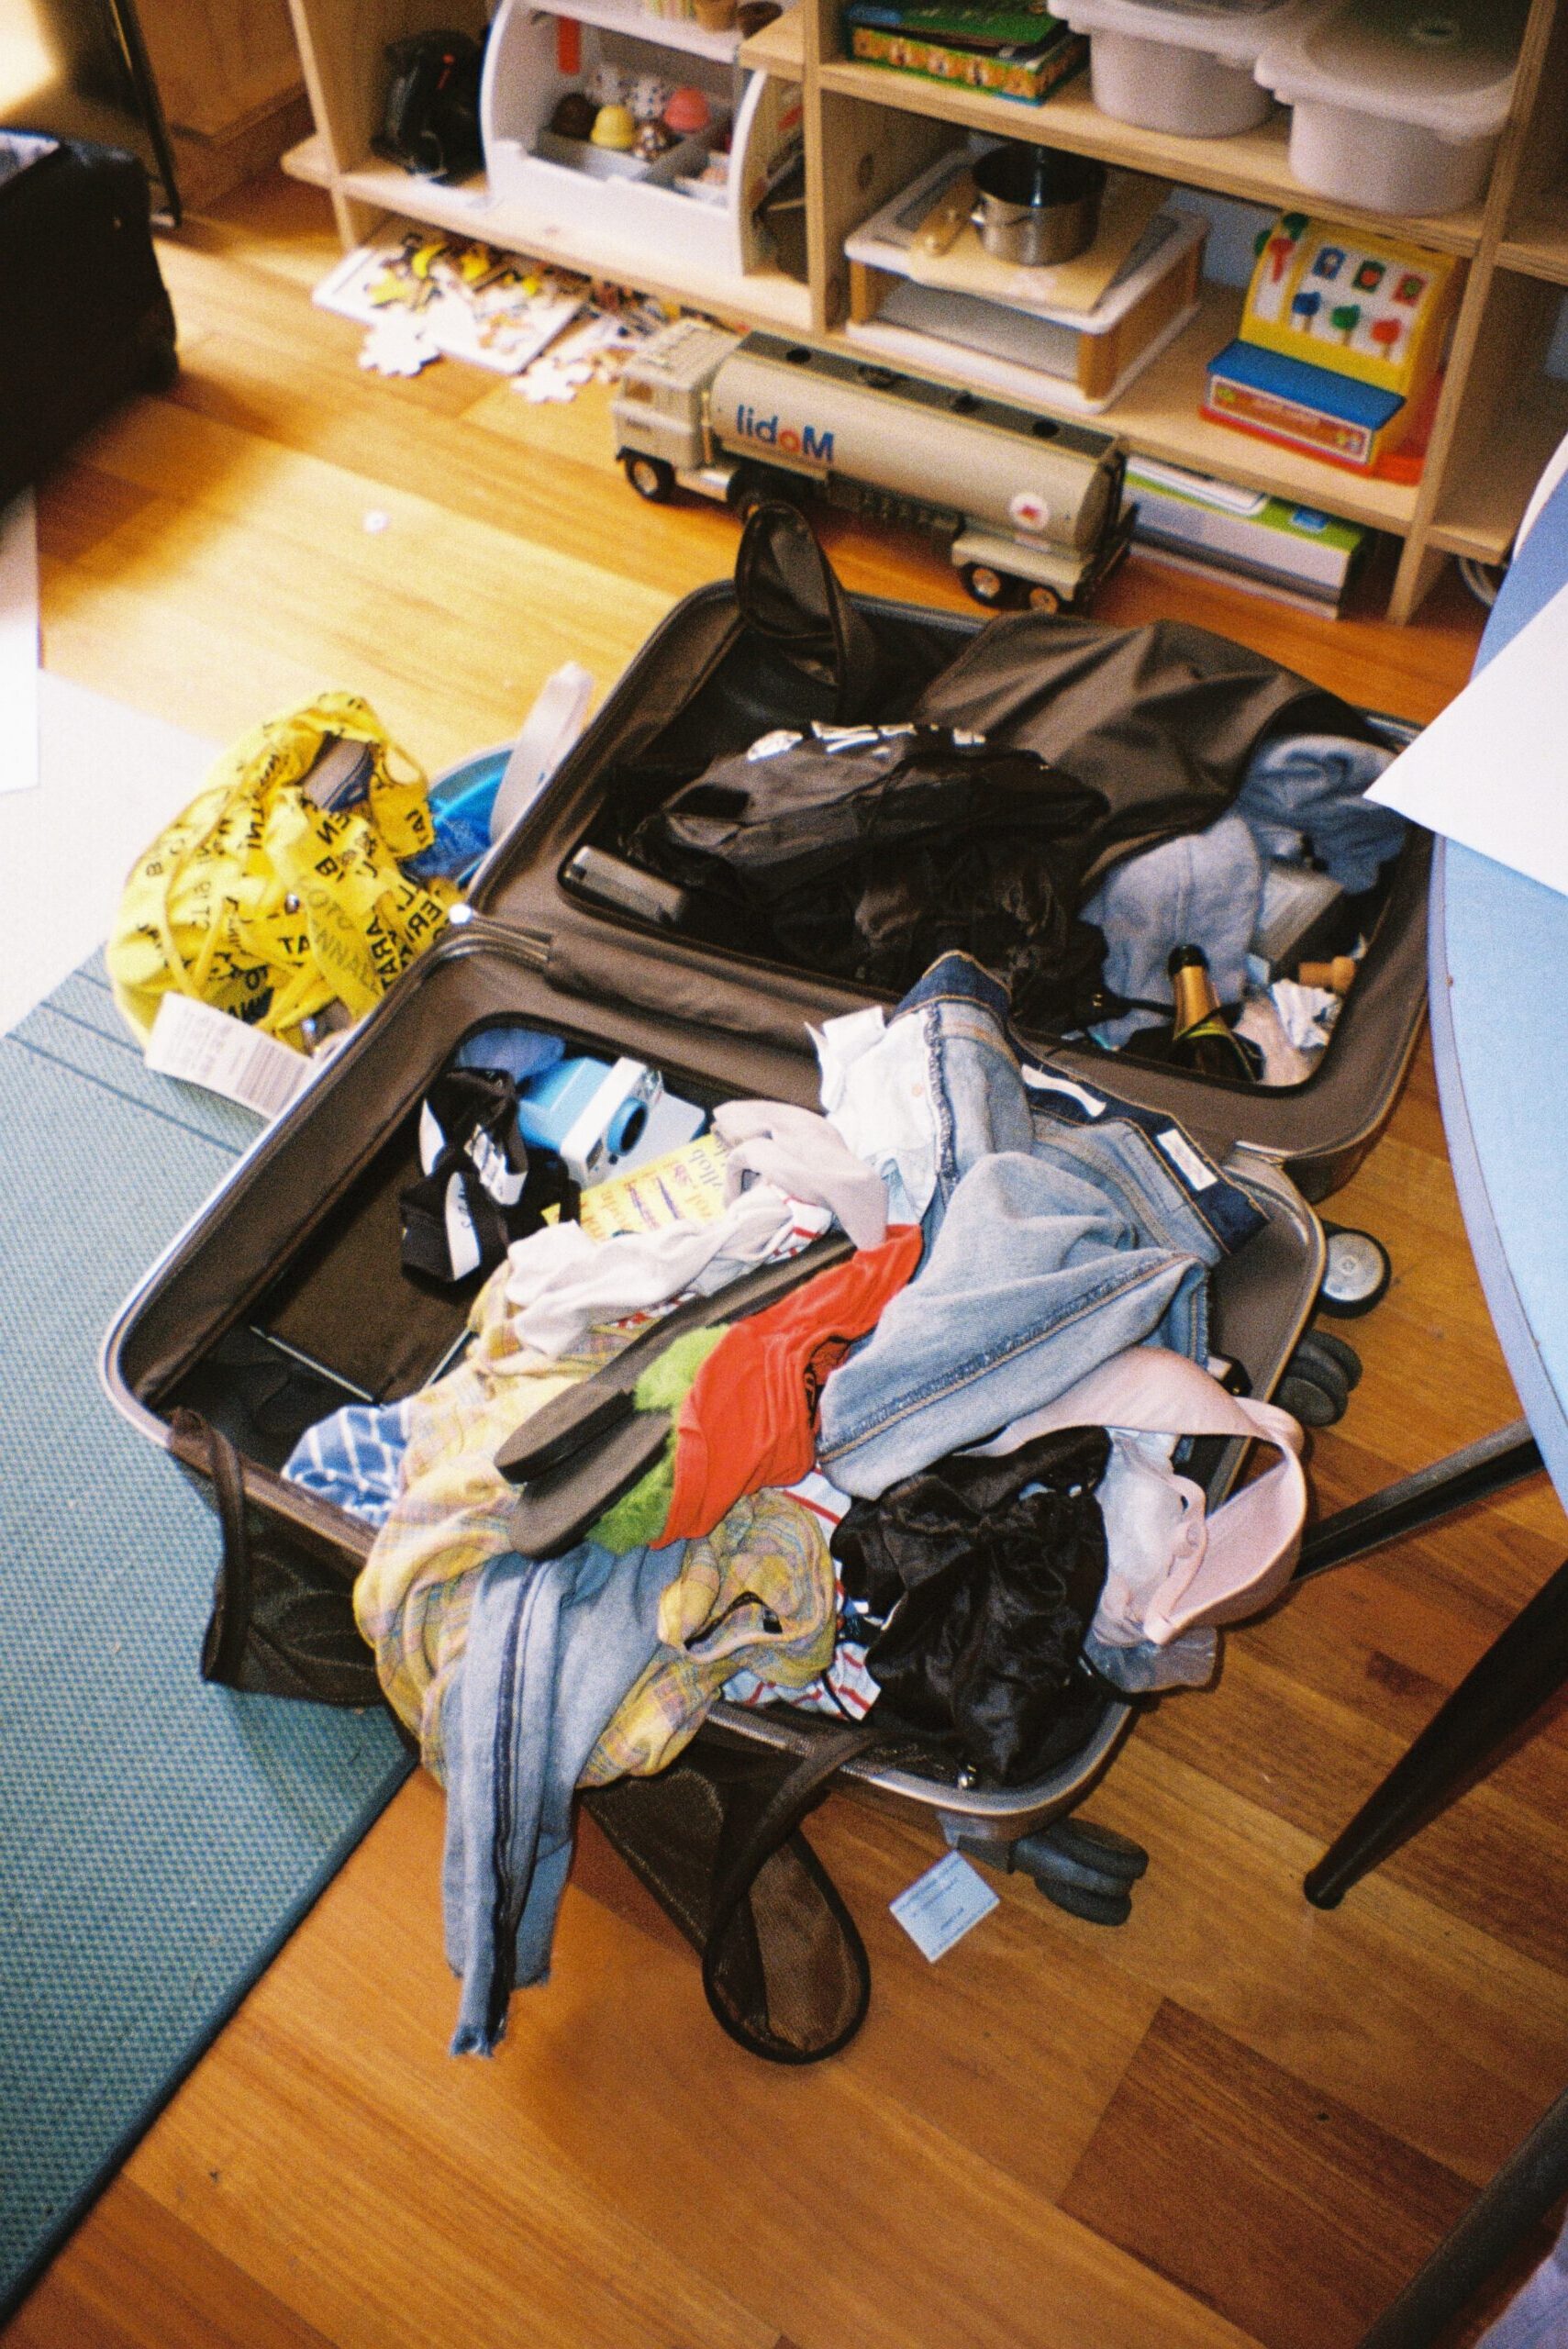 Messy suitcase packing